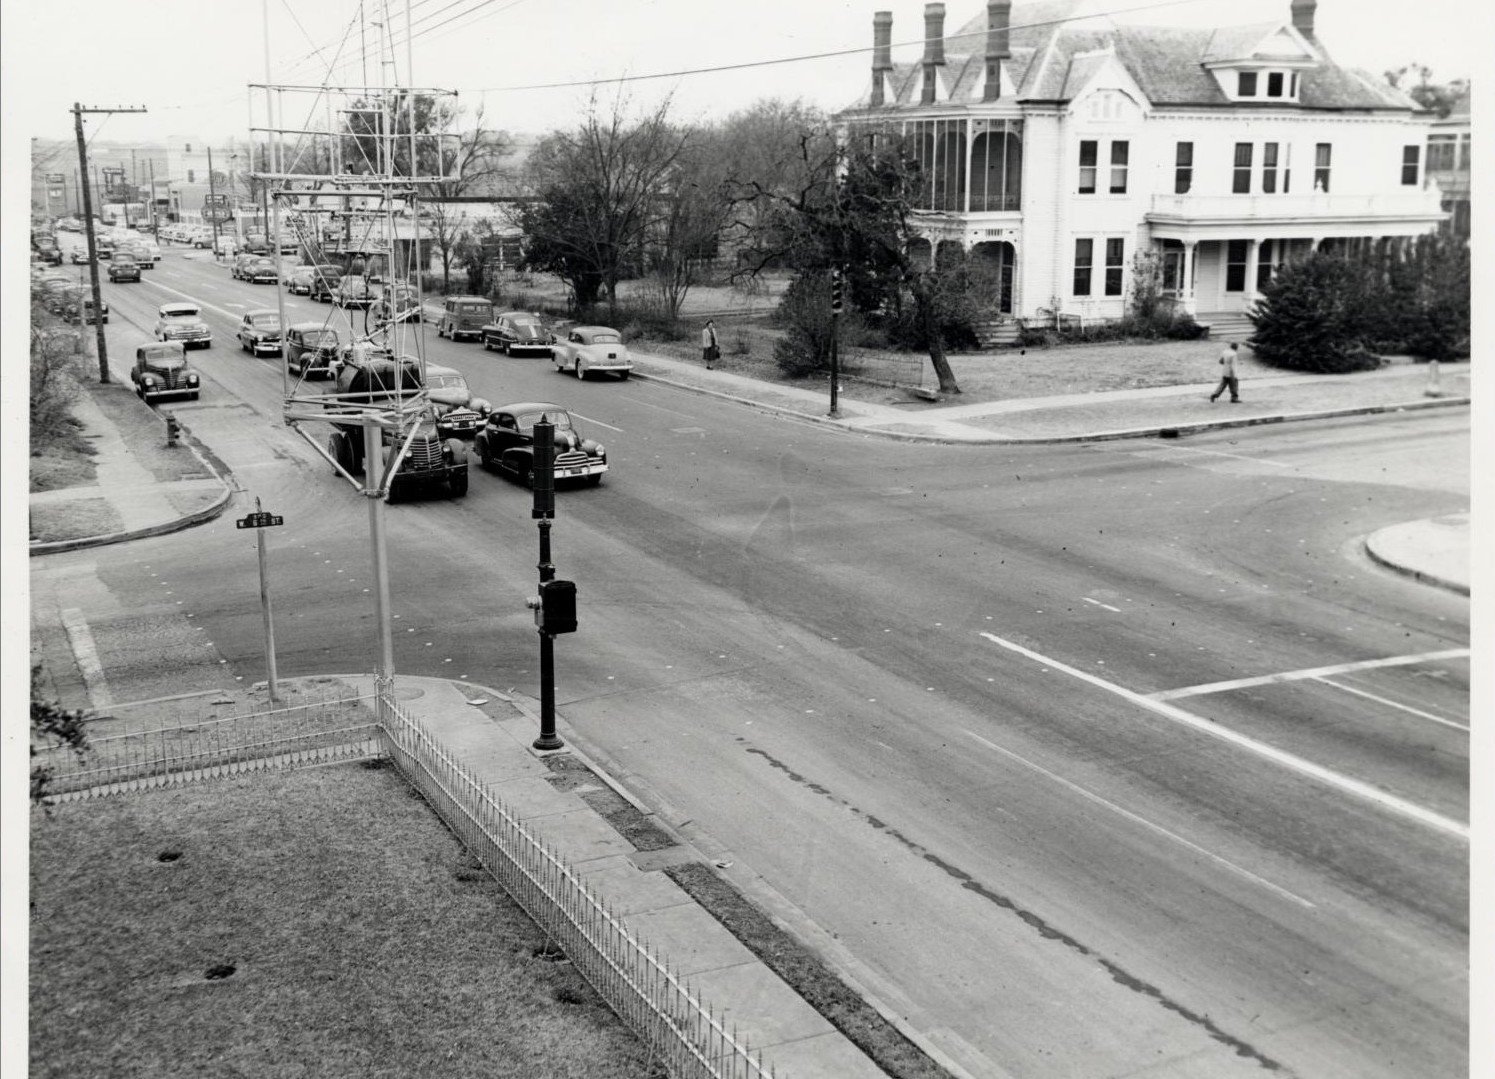 Lamar and 6th St. in the 1930s